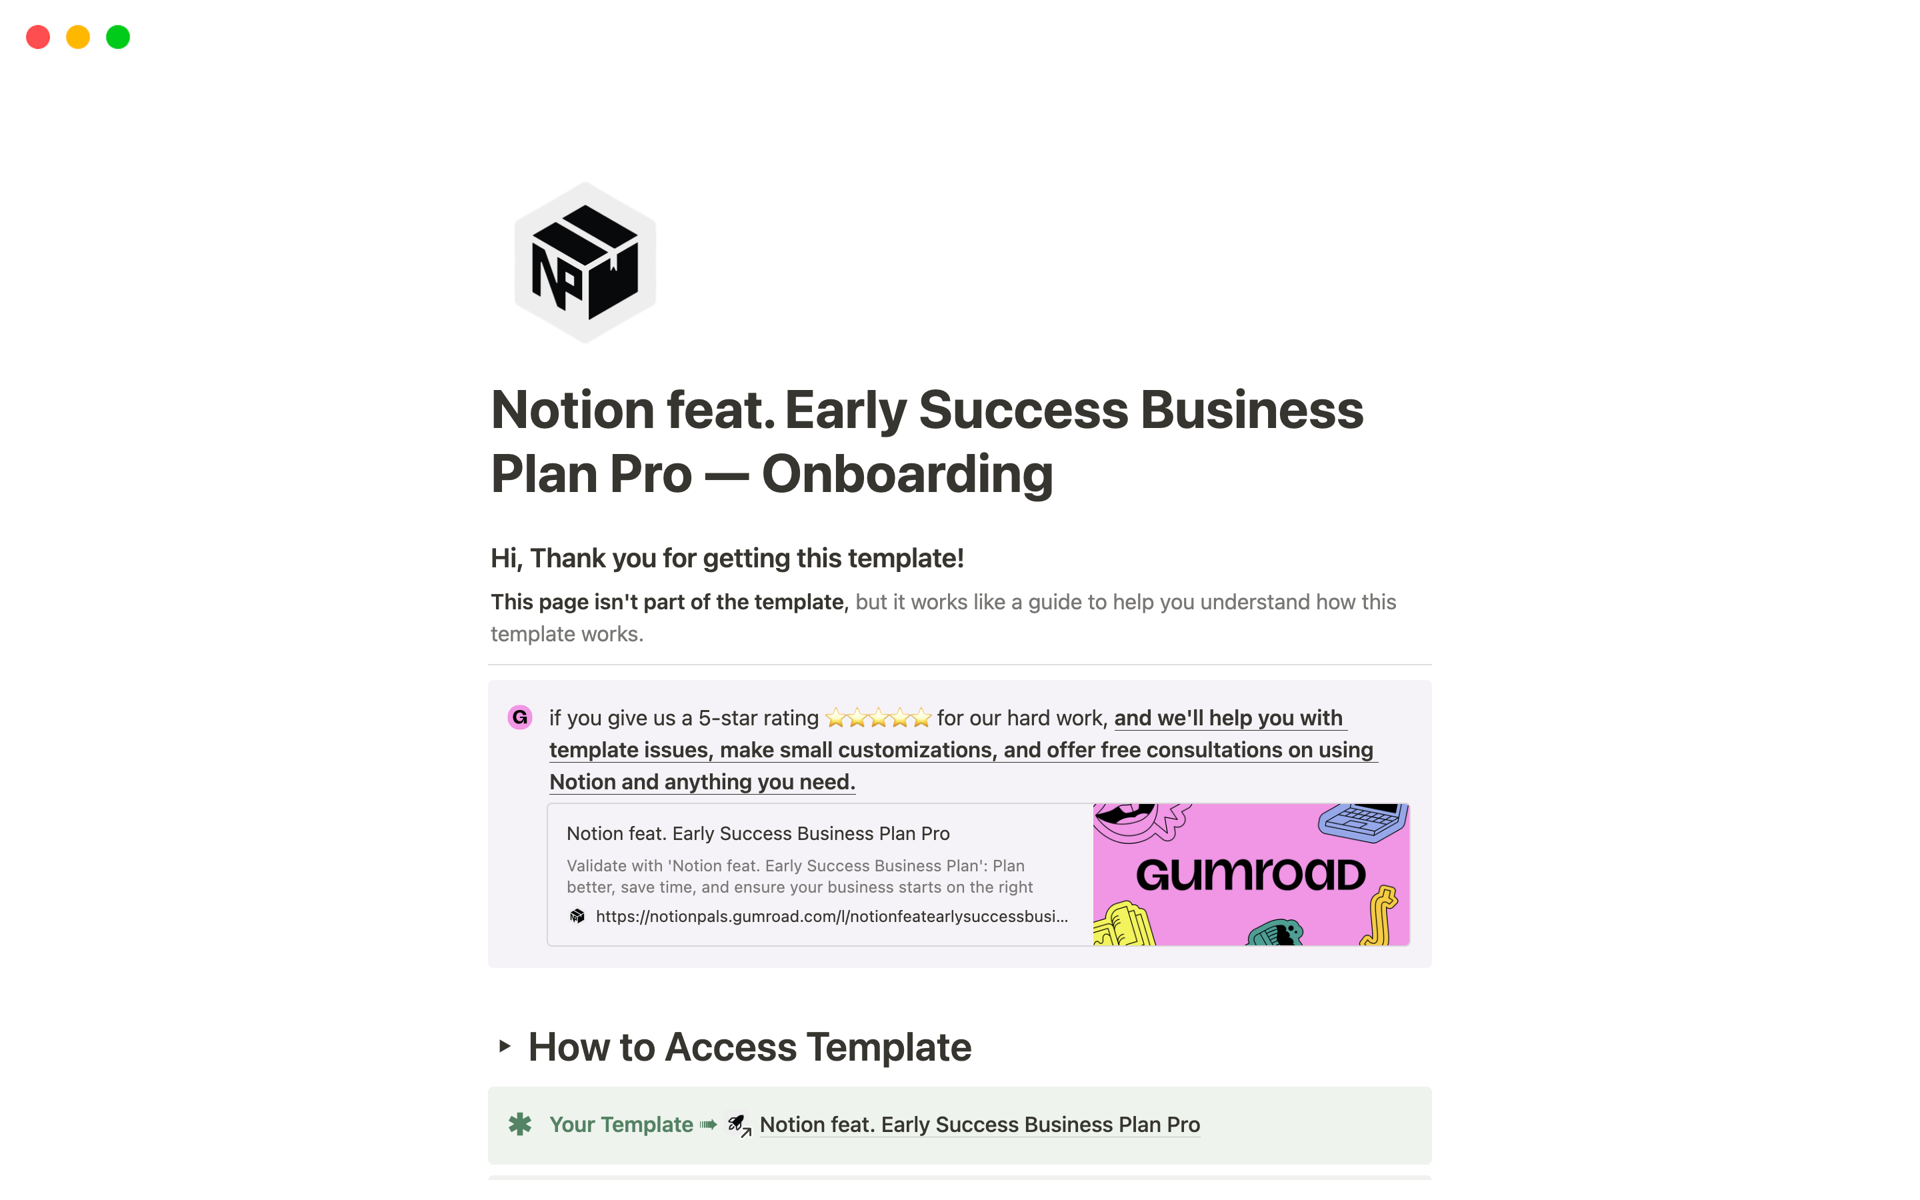 Validate with 'Notion feat. Early Success Business Plan': Plan better, save time, and ensure your business starts on the right track. Trust, but verify your ideas!